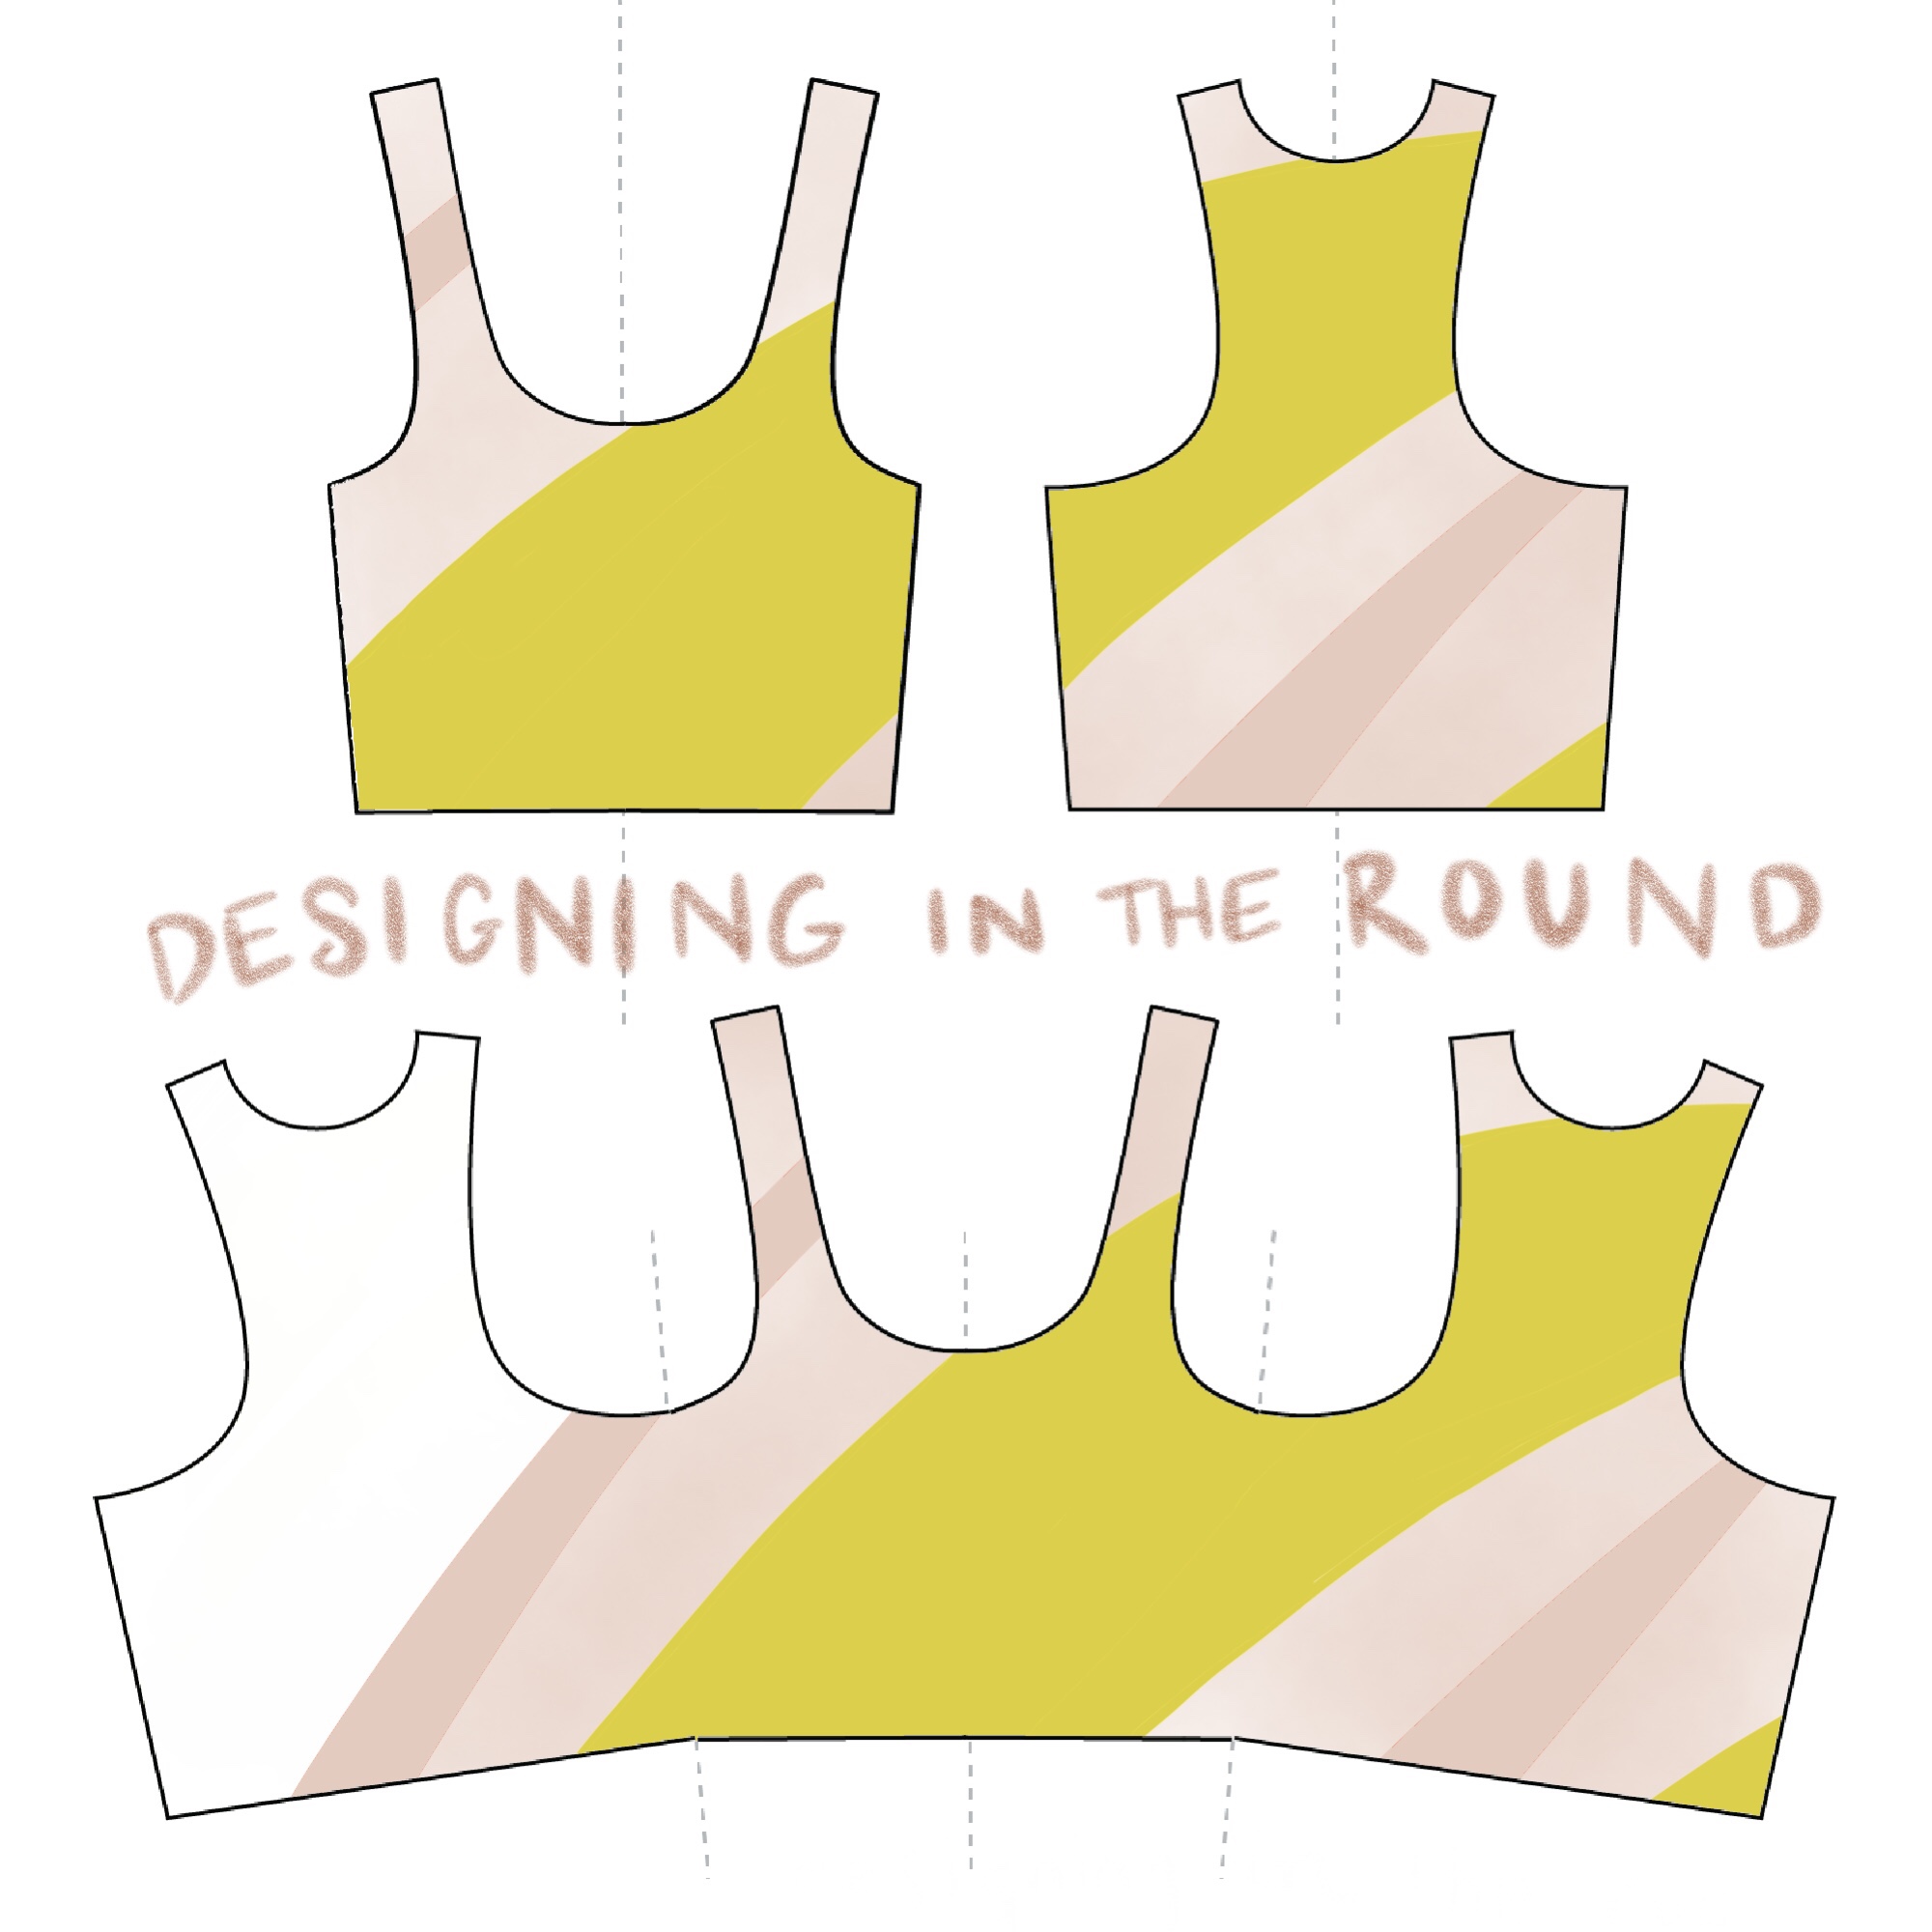 Lingerie design tip one and two: An illustration of the Axis Tank in colorblocking, in white, two shades of pink and avocado green